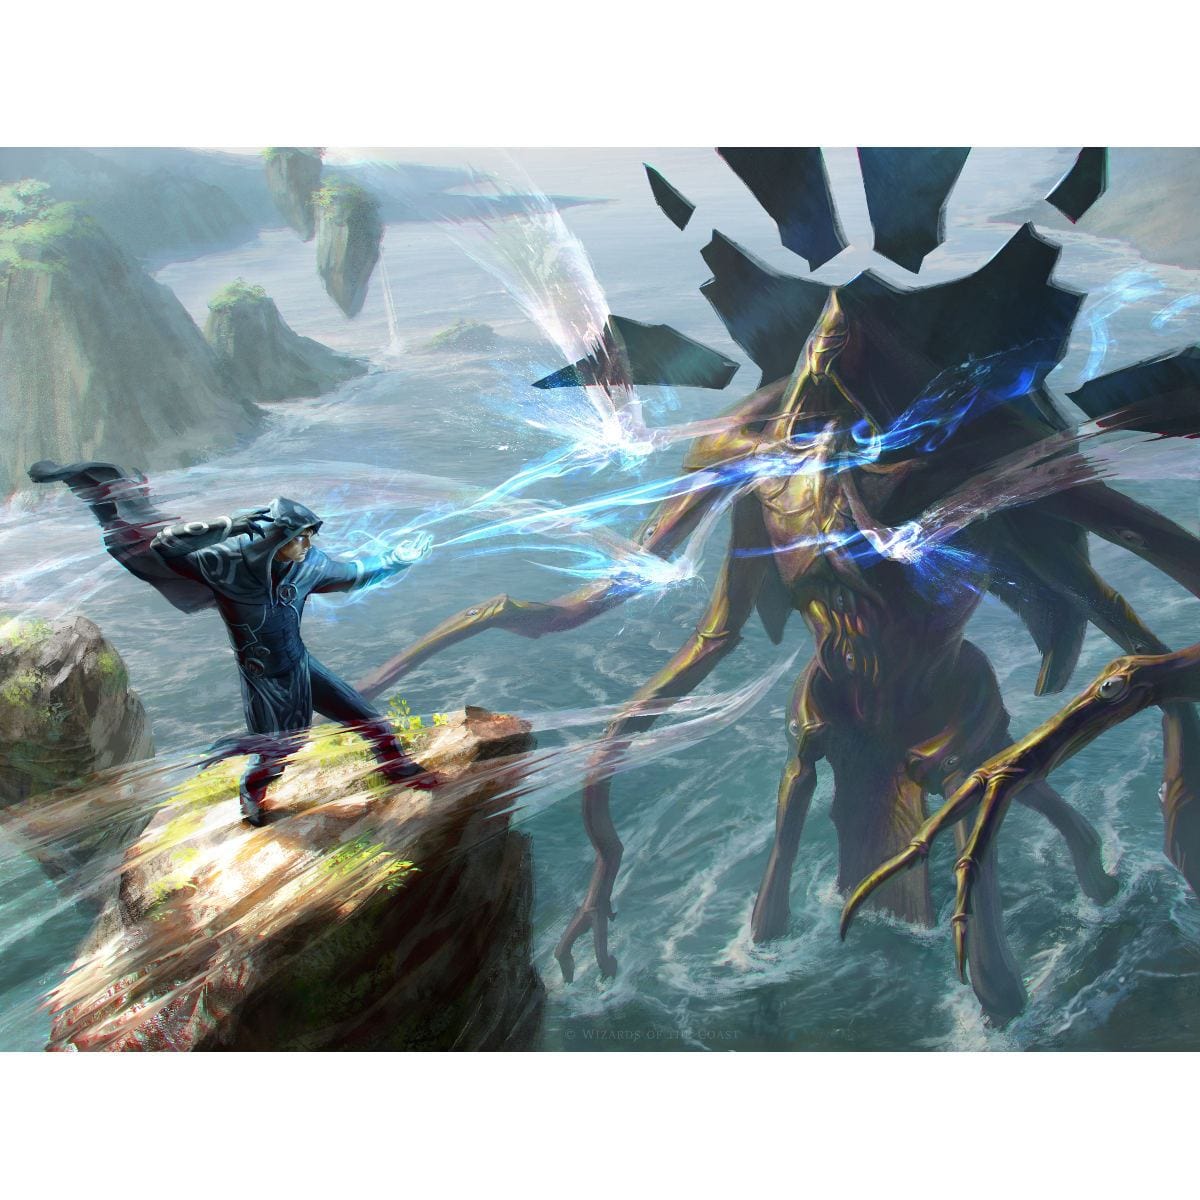 Clash of Wills Print - Print - Original Magic Art - Accessories for Magic the Gathering and other card games